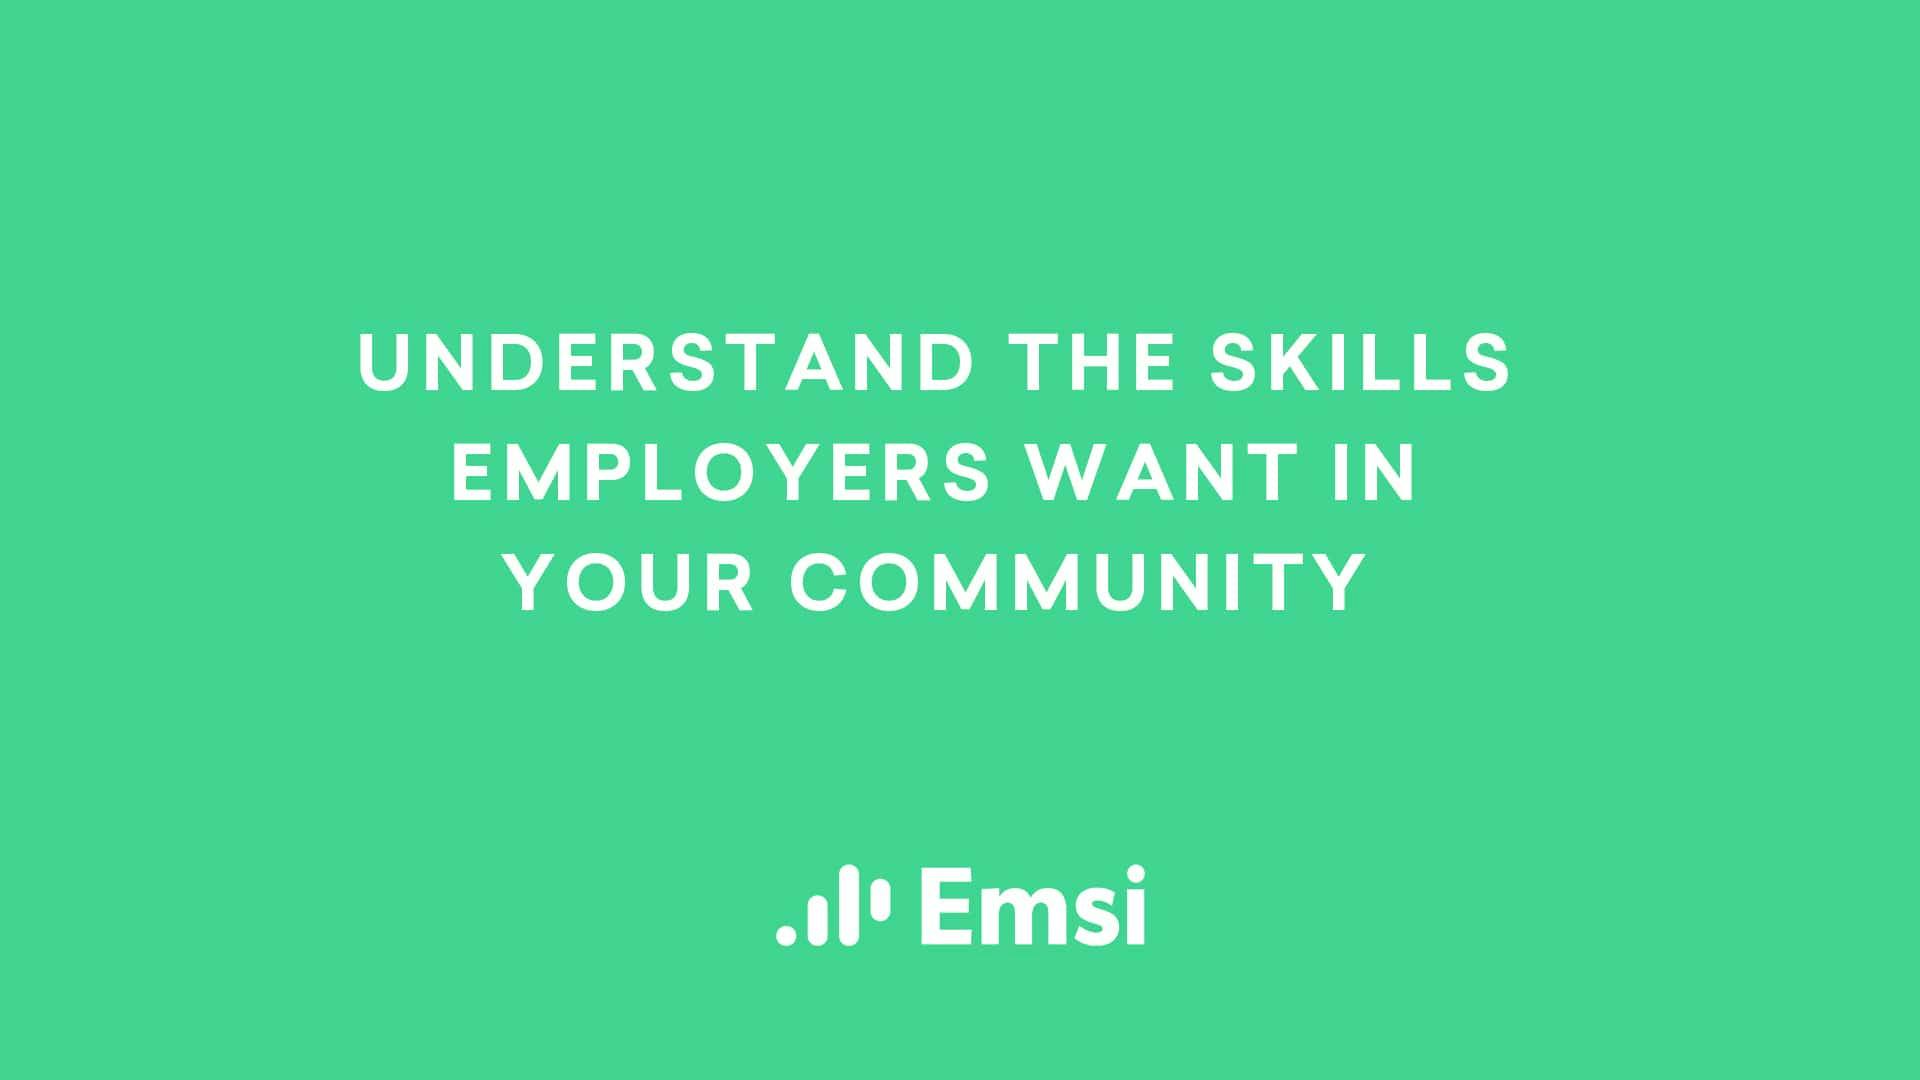 Understand the Skills Employers Want in Your Community